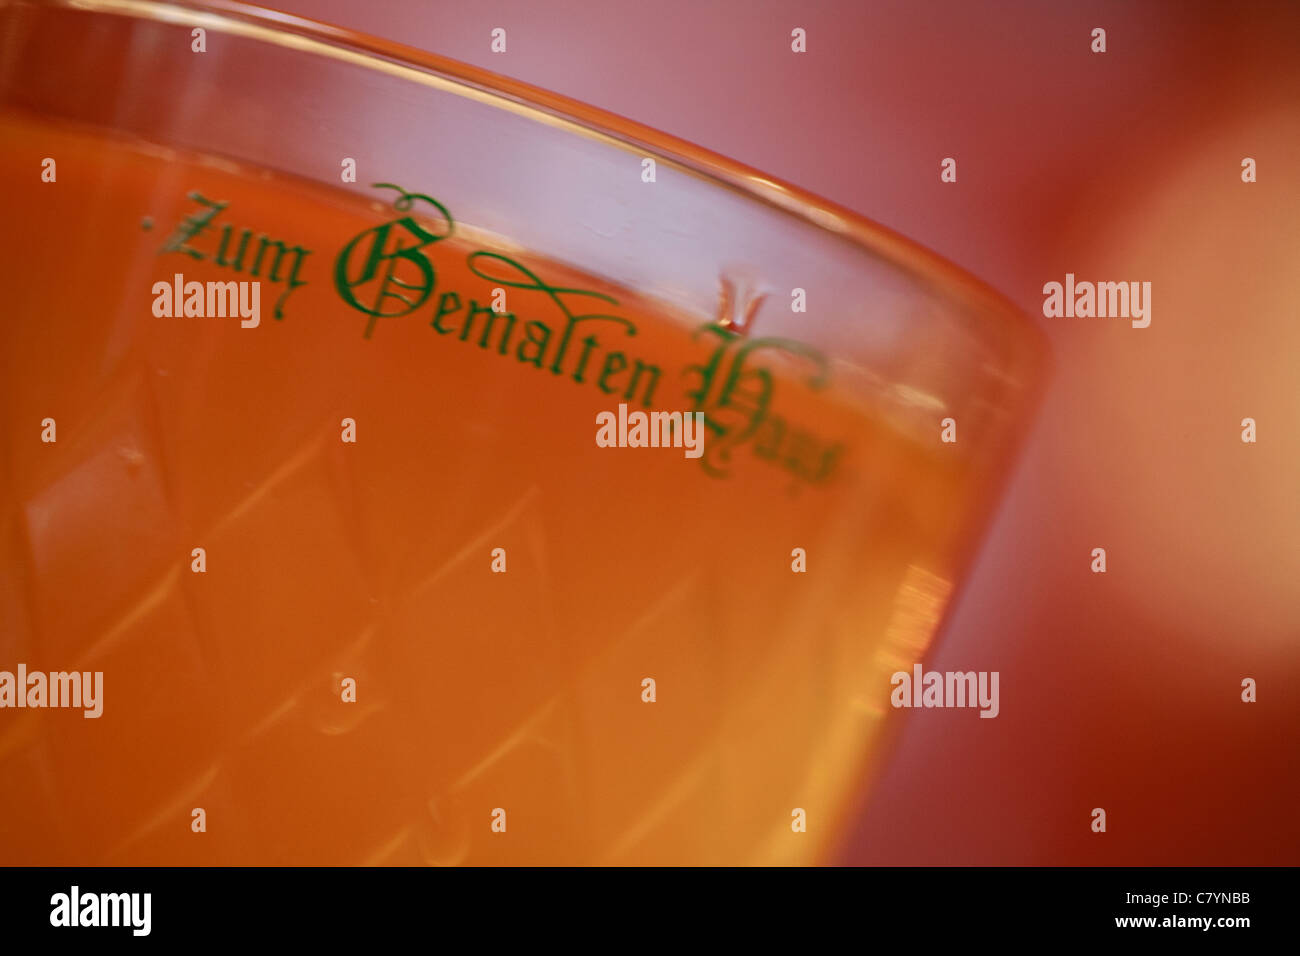 A glass of the famous Apfelwein particular to Frankfurt, Germany. Stock Photo